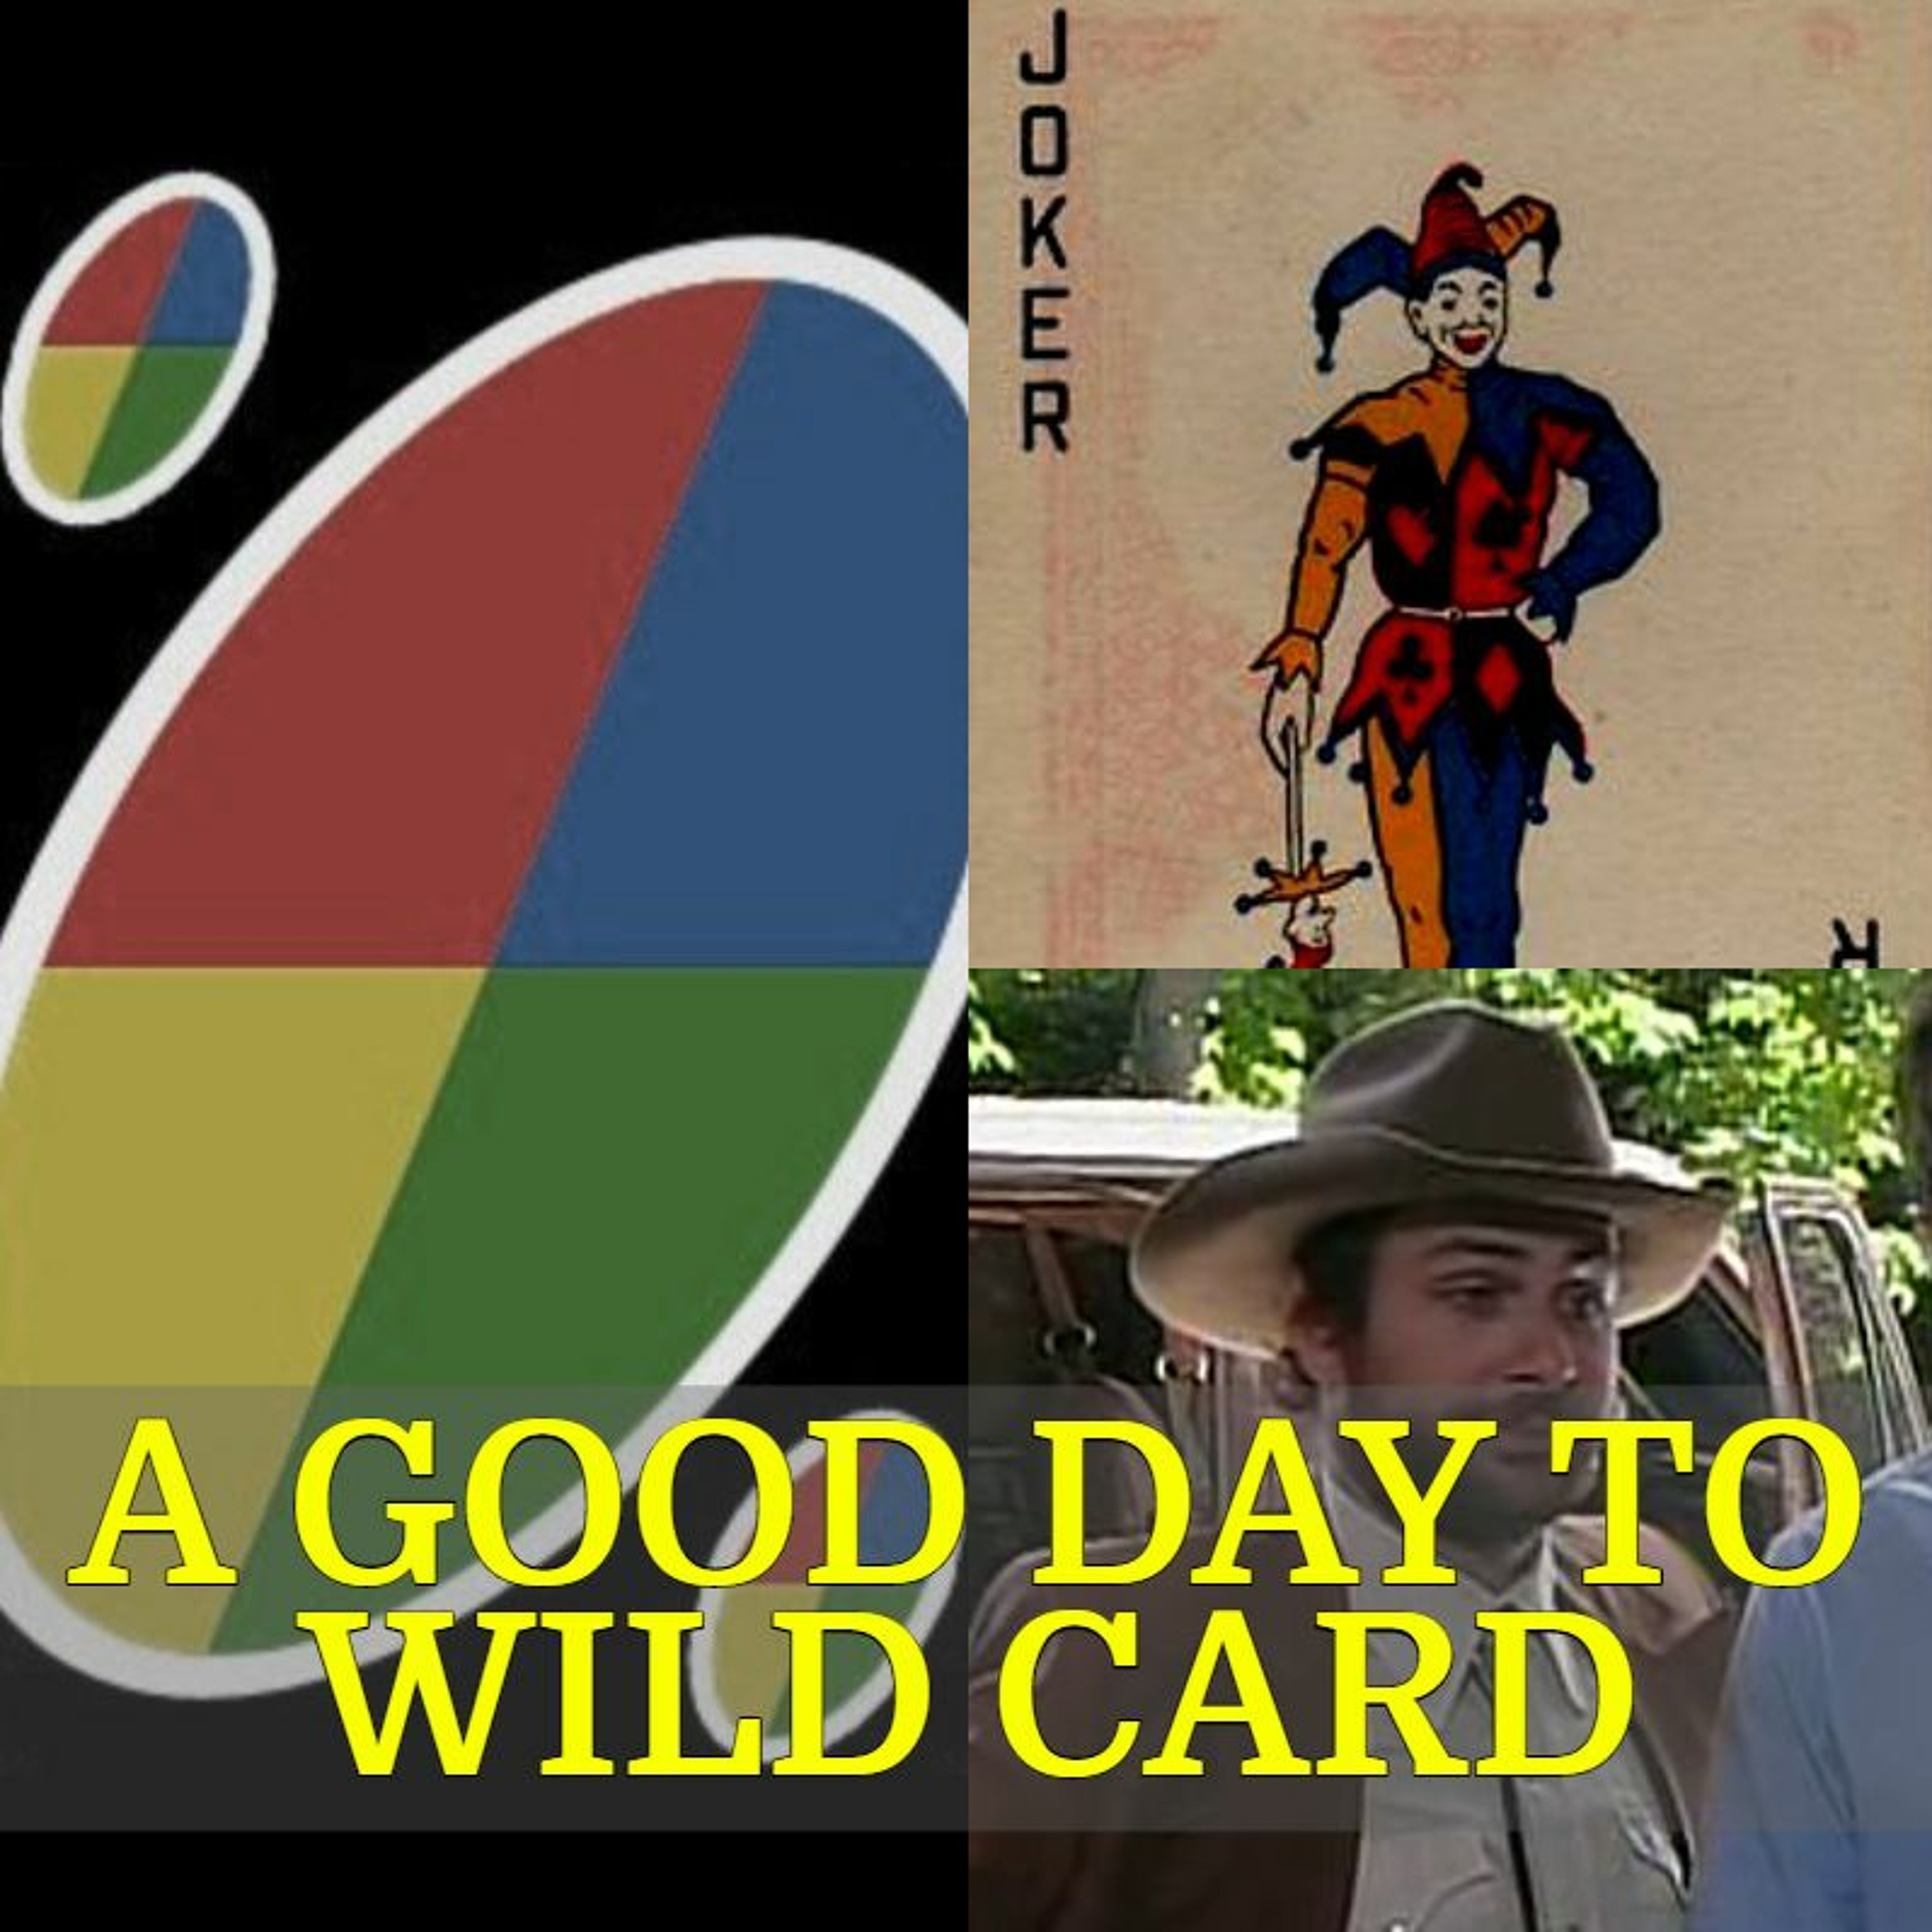 064 - A Good Day to Wild Card